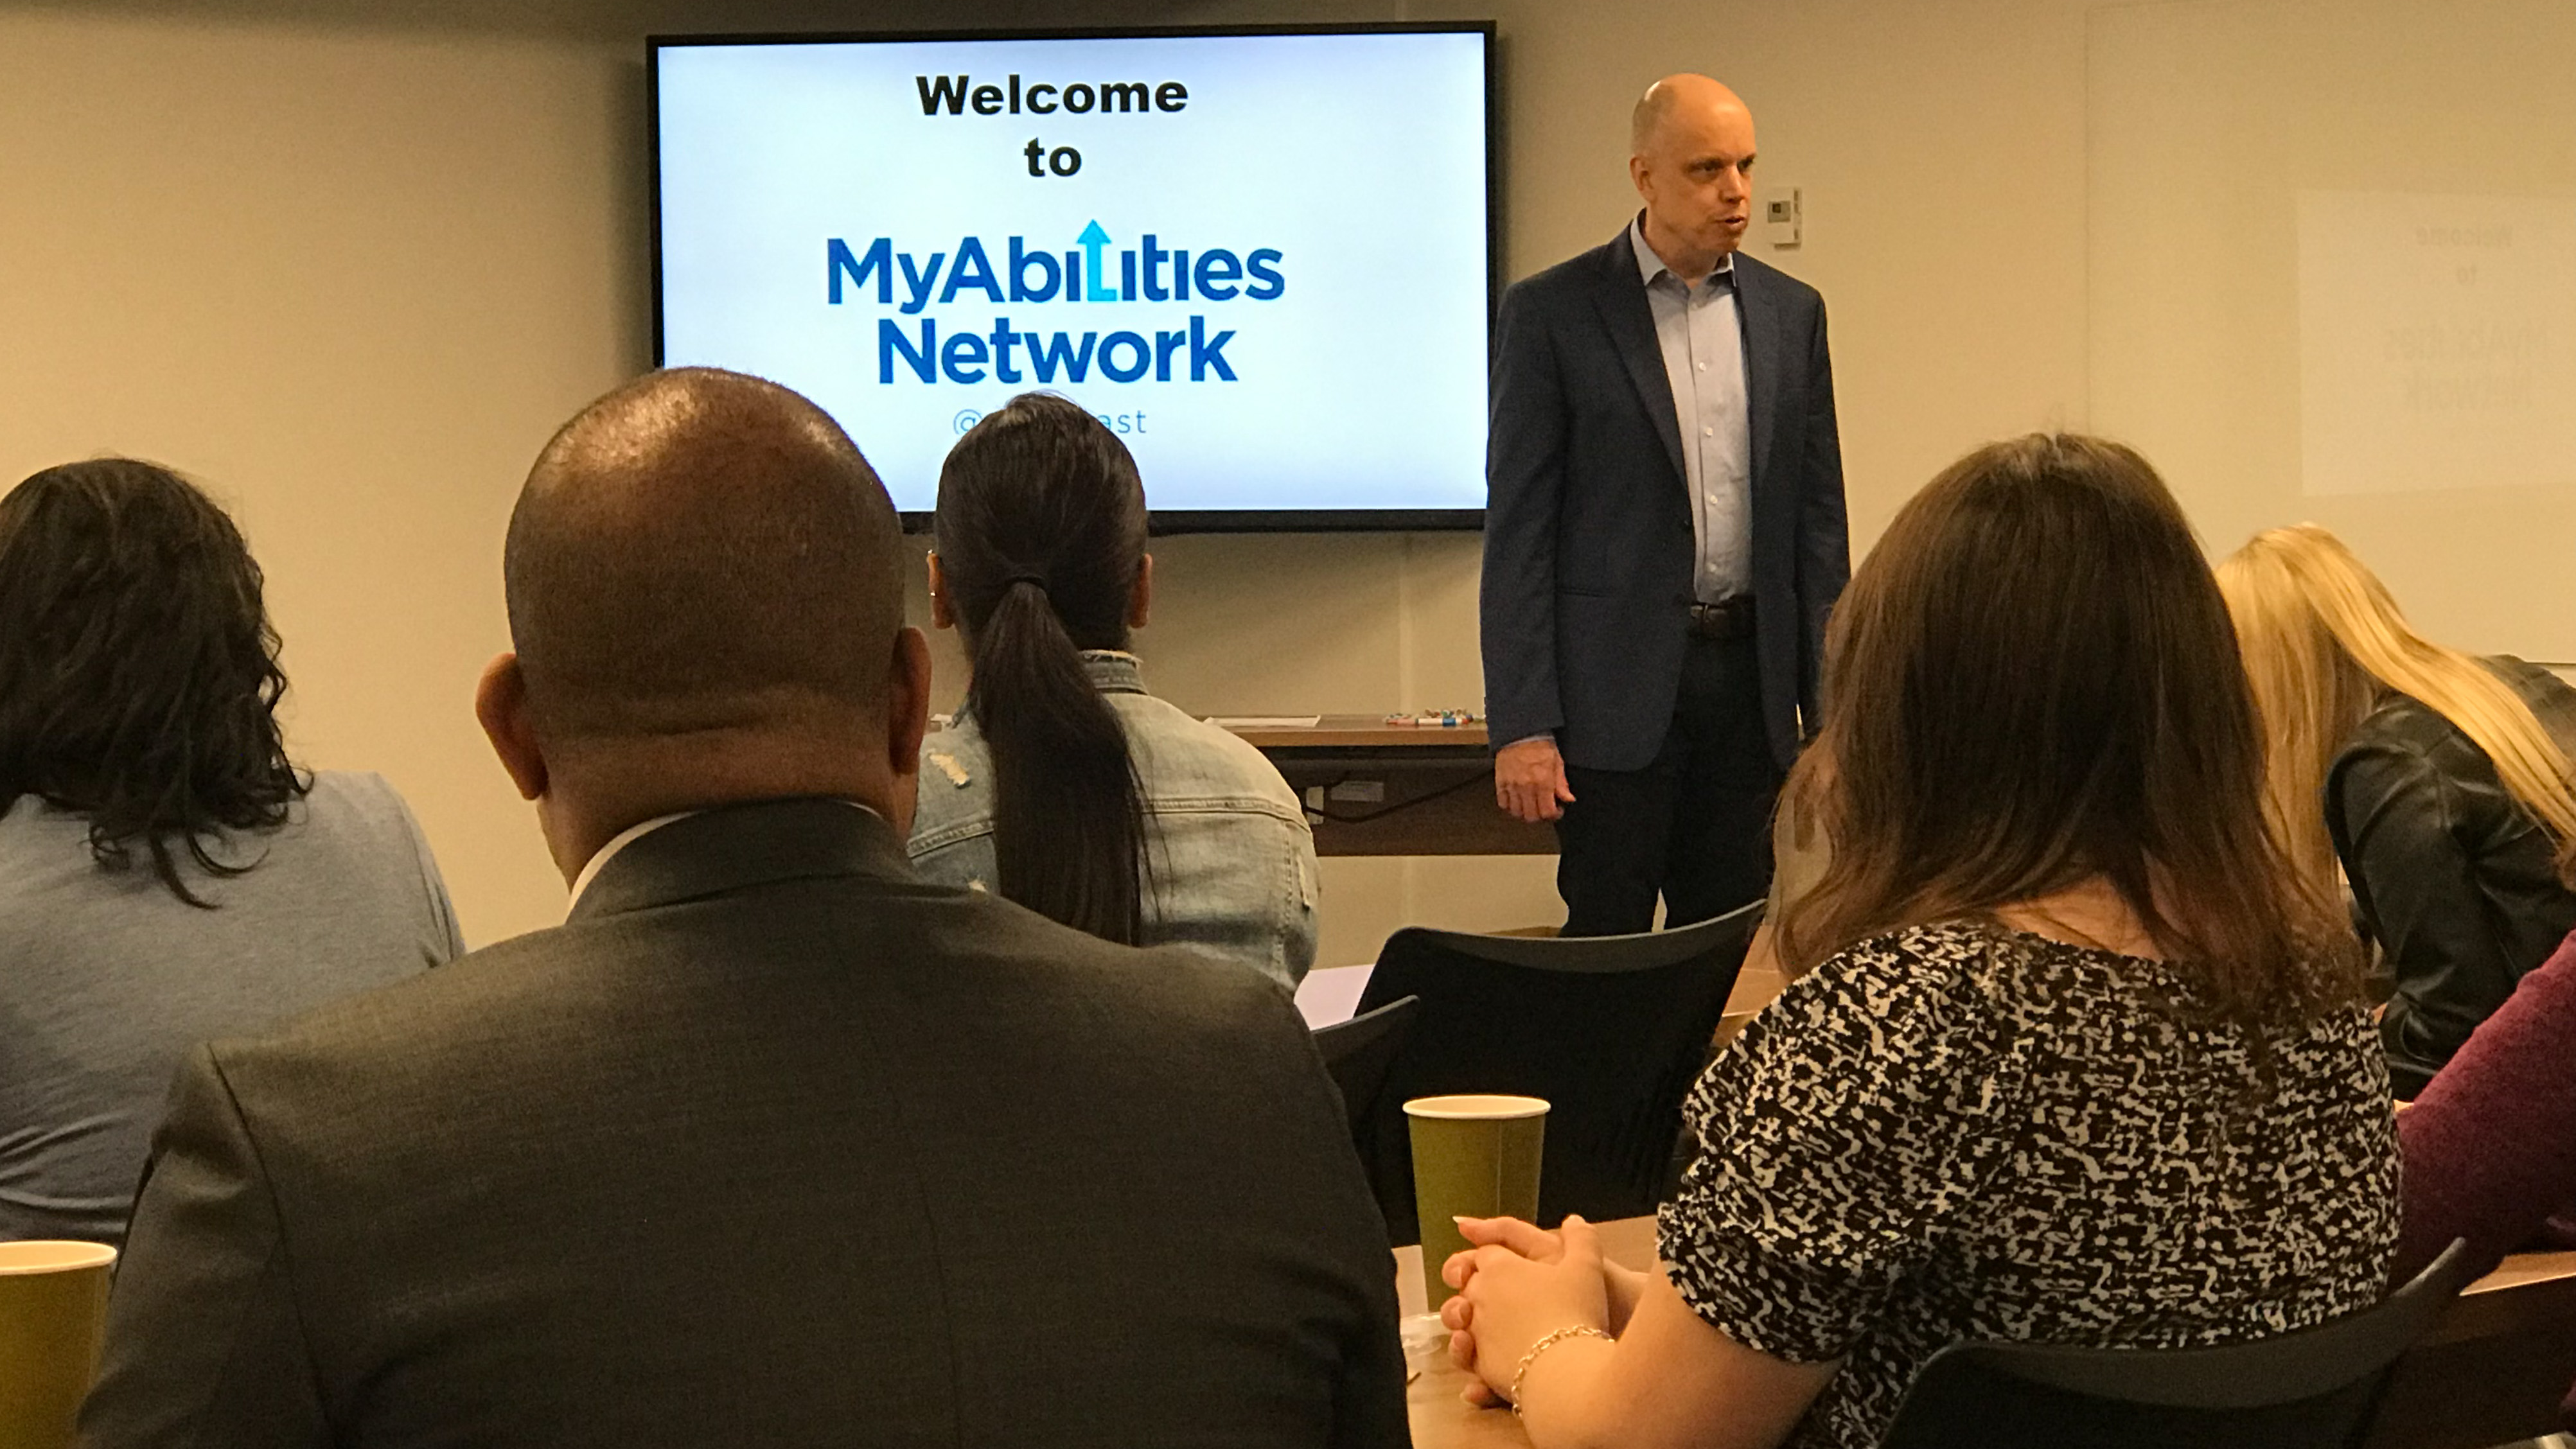 Tom Wlodkowski speaking to a group of employees with a screen behind him displaying the MyAbilities Network logo